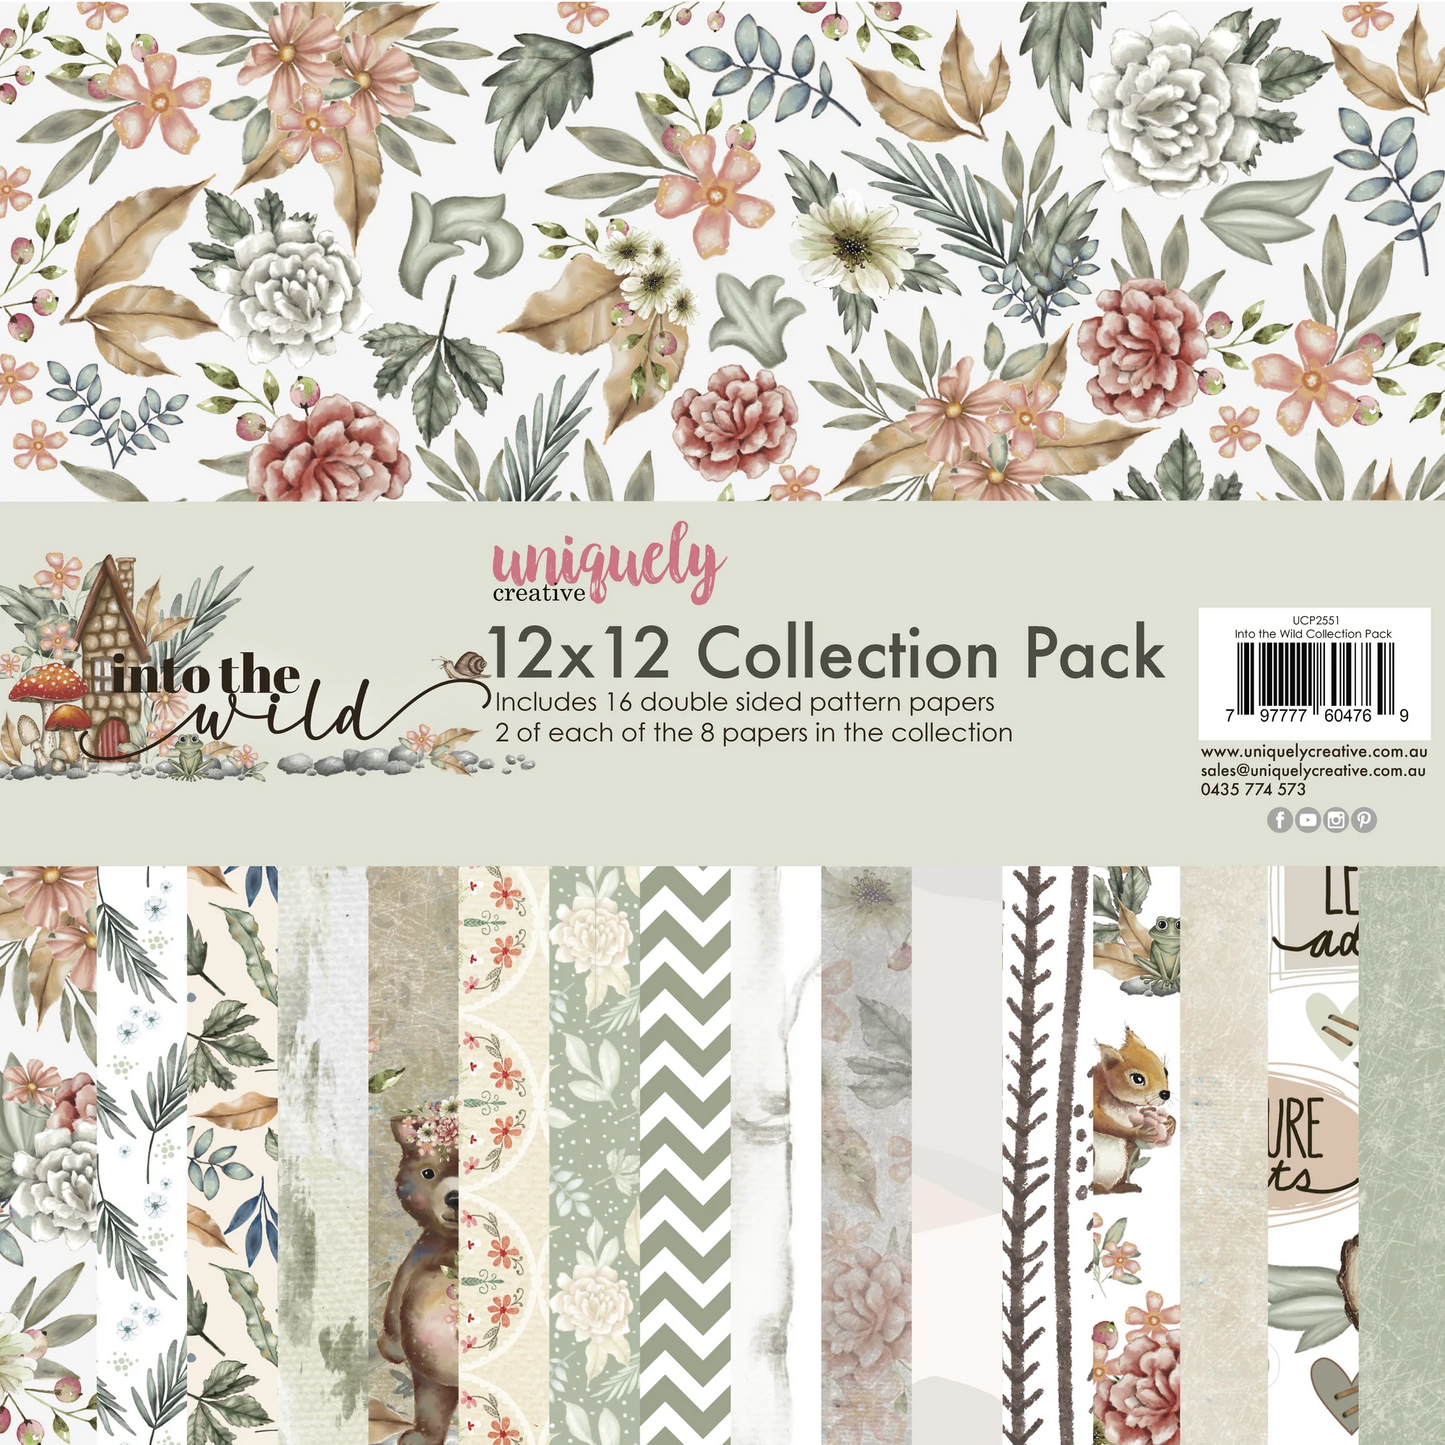 Uniquely Creative 12x12 Double Sided Paper Pack - Into the Wild